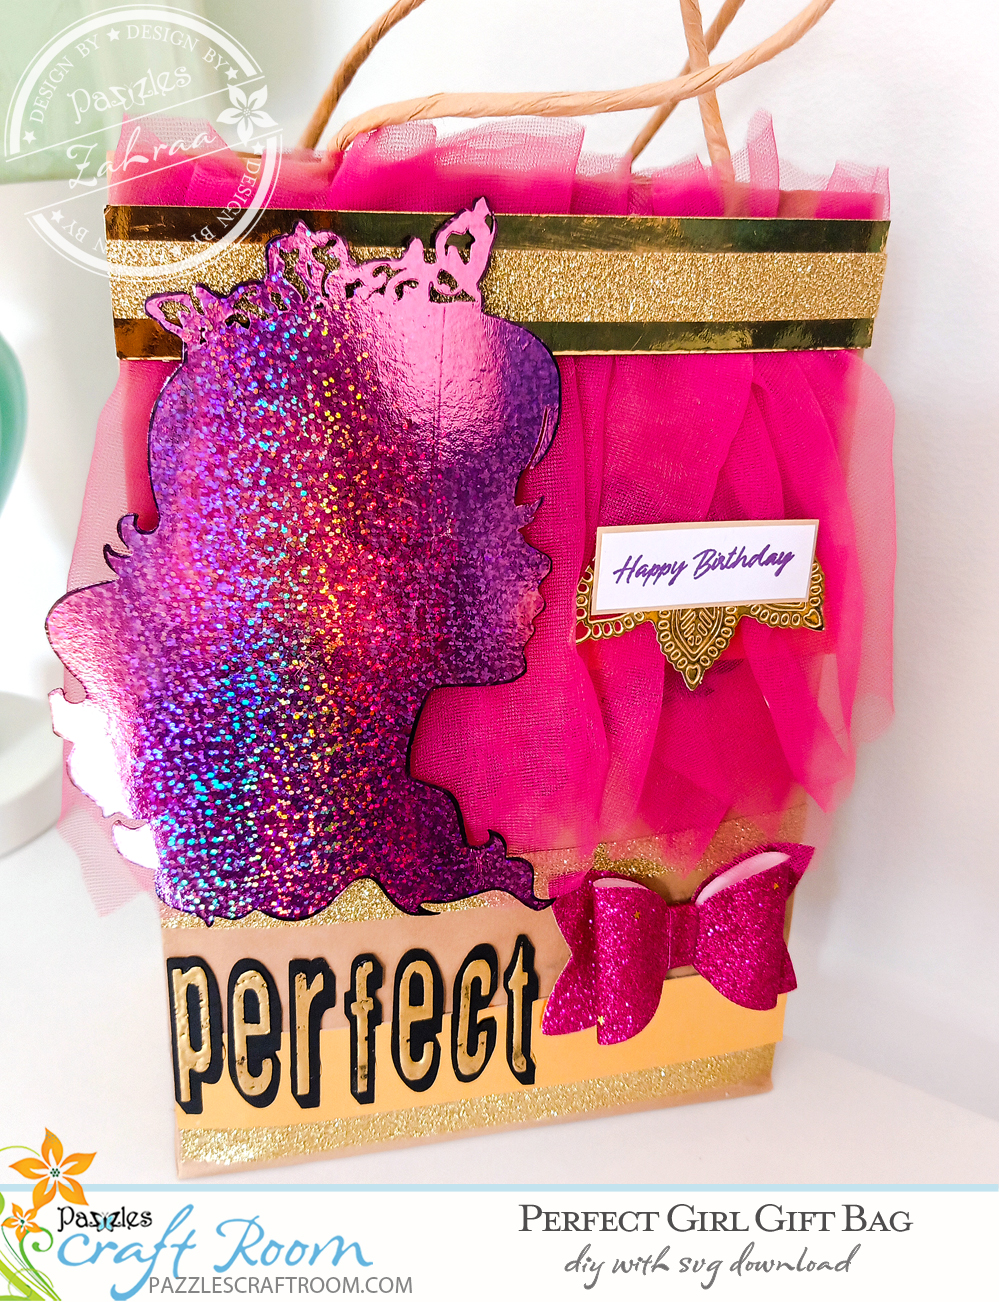 Pazzles DIY Perfect Girl Gift Bag with instant SVG download. Instant SVG download compatible with all major electronic cutters including Pazzles Inspiration, Cricut, and Silhouette Cameo. Design by Zahraa Darweesh.